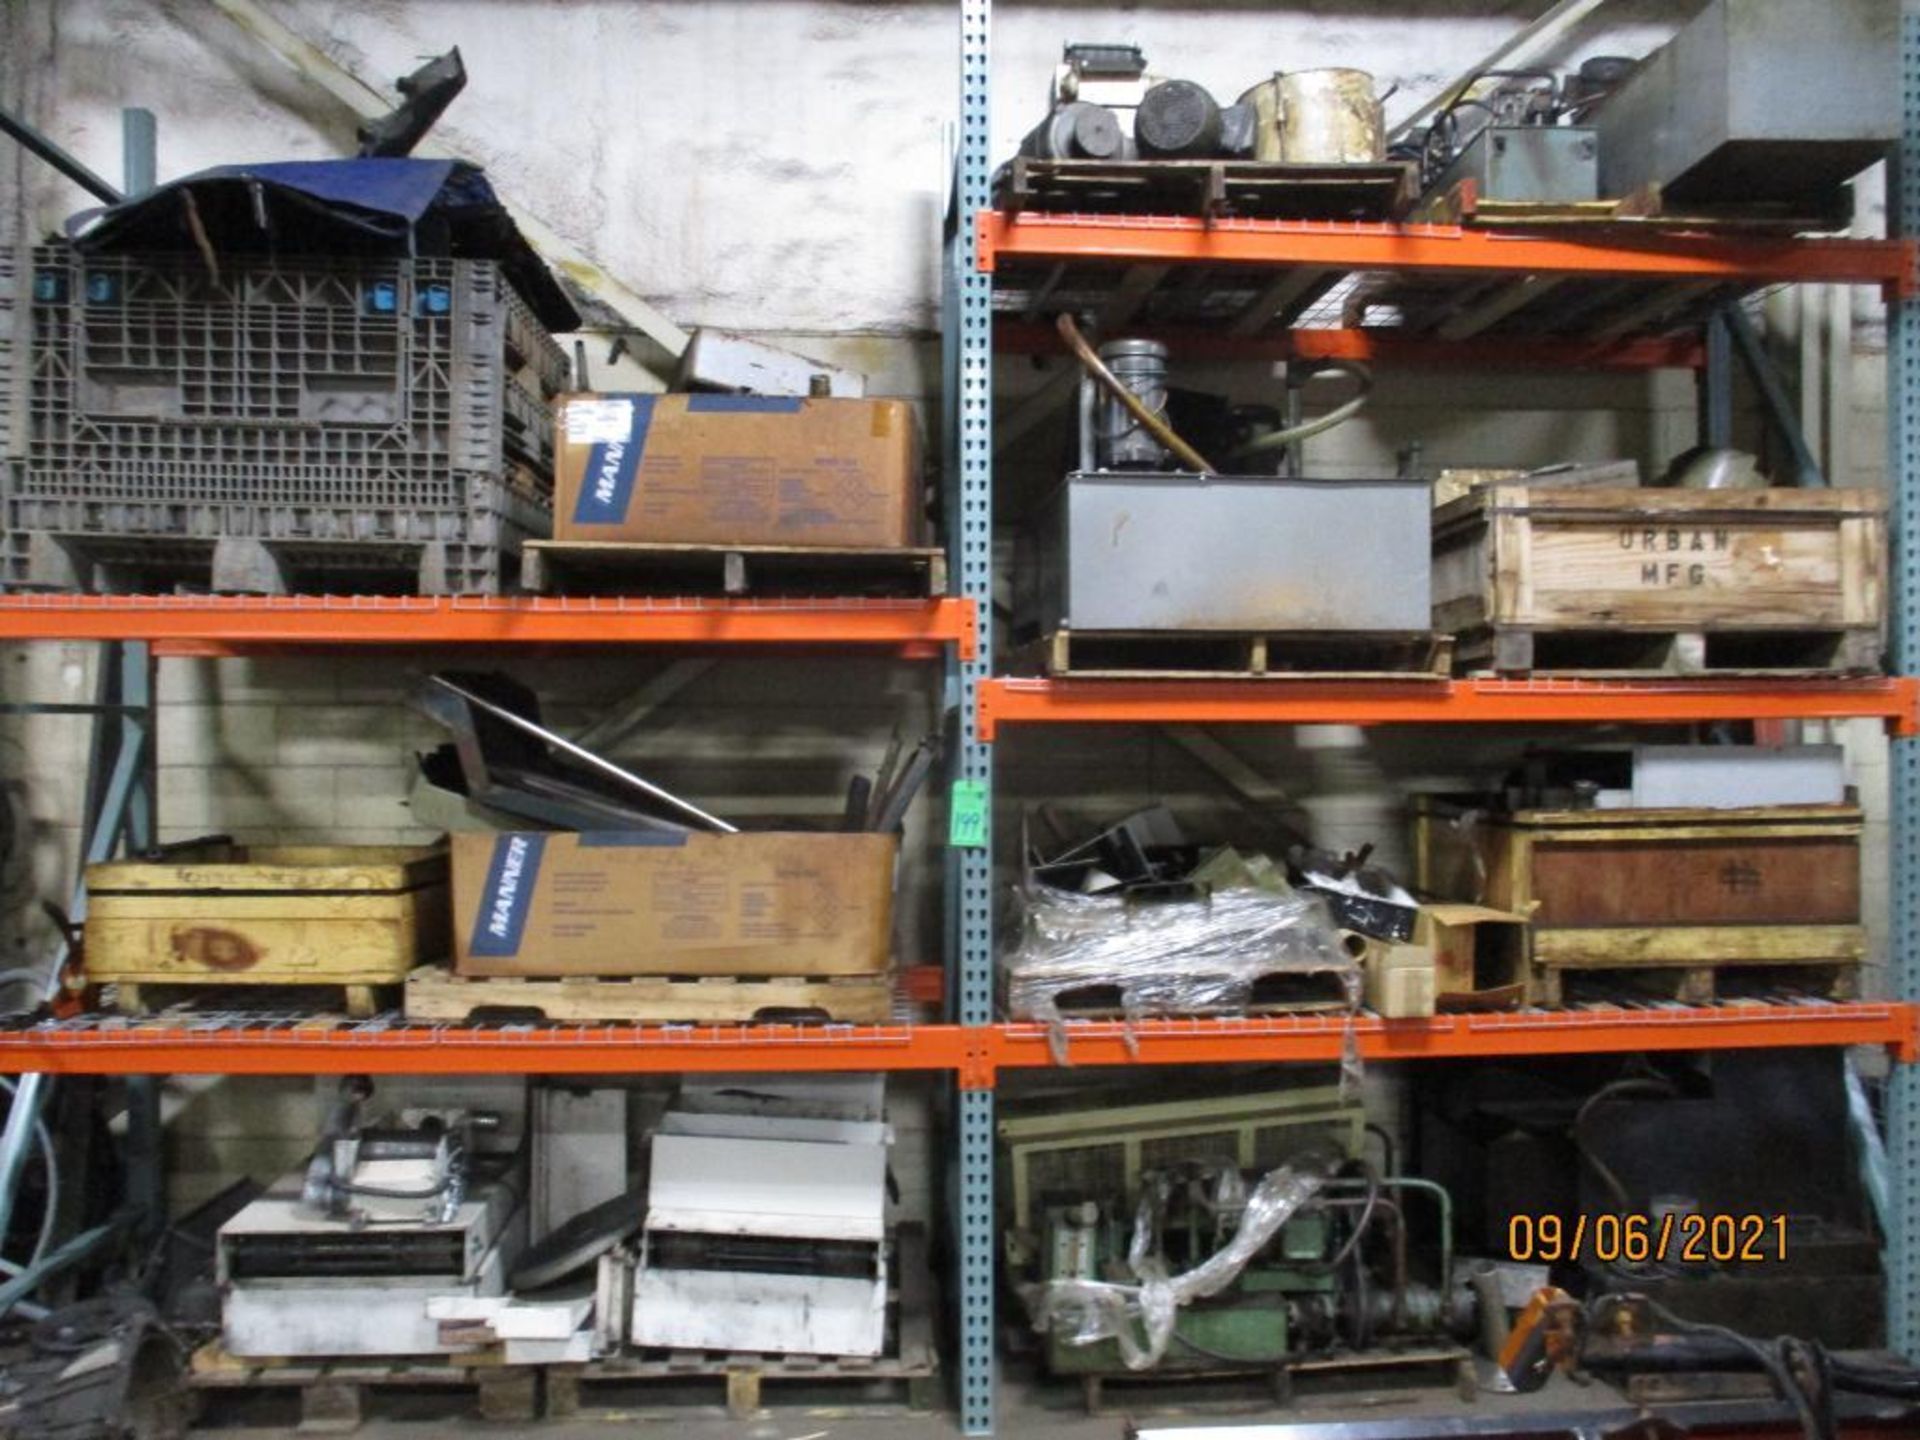 Contents Of Racking Only Including Machine Parts, Pumps, Motors, Etc. Gray Gaylord Container Top Lef